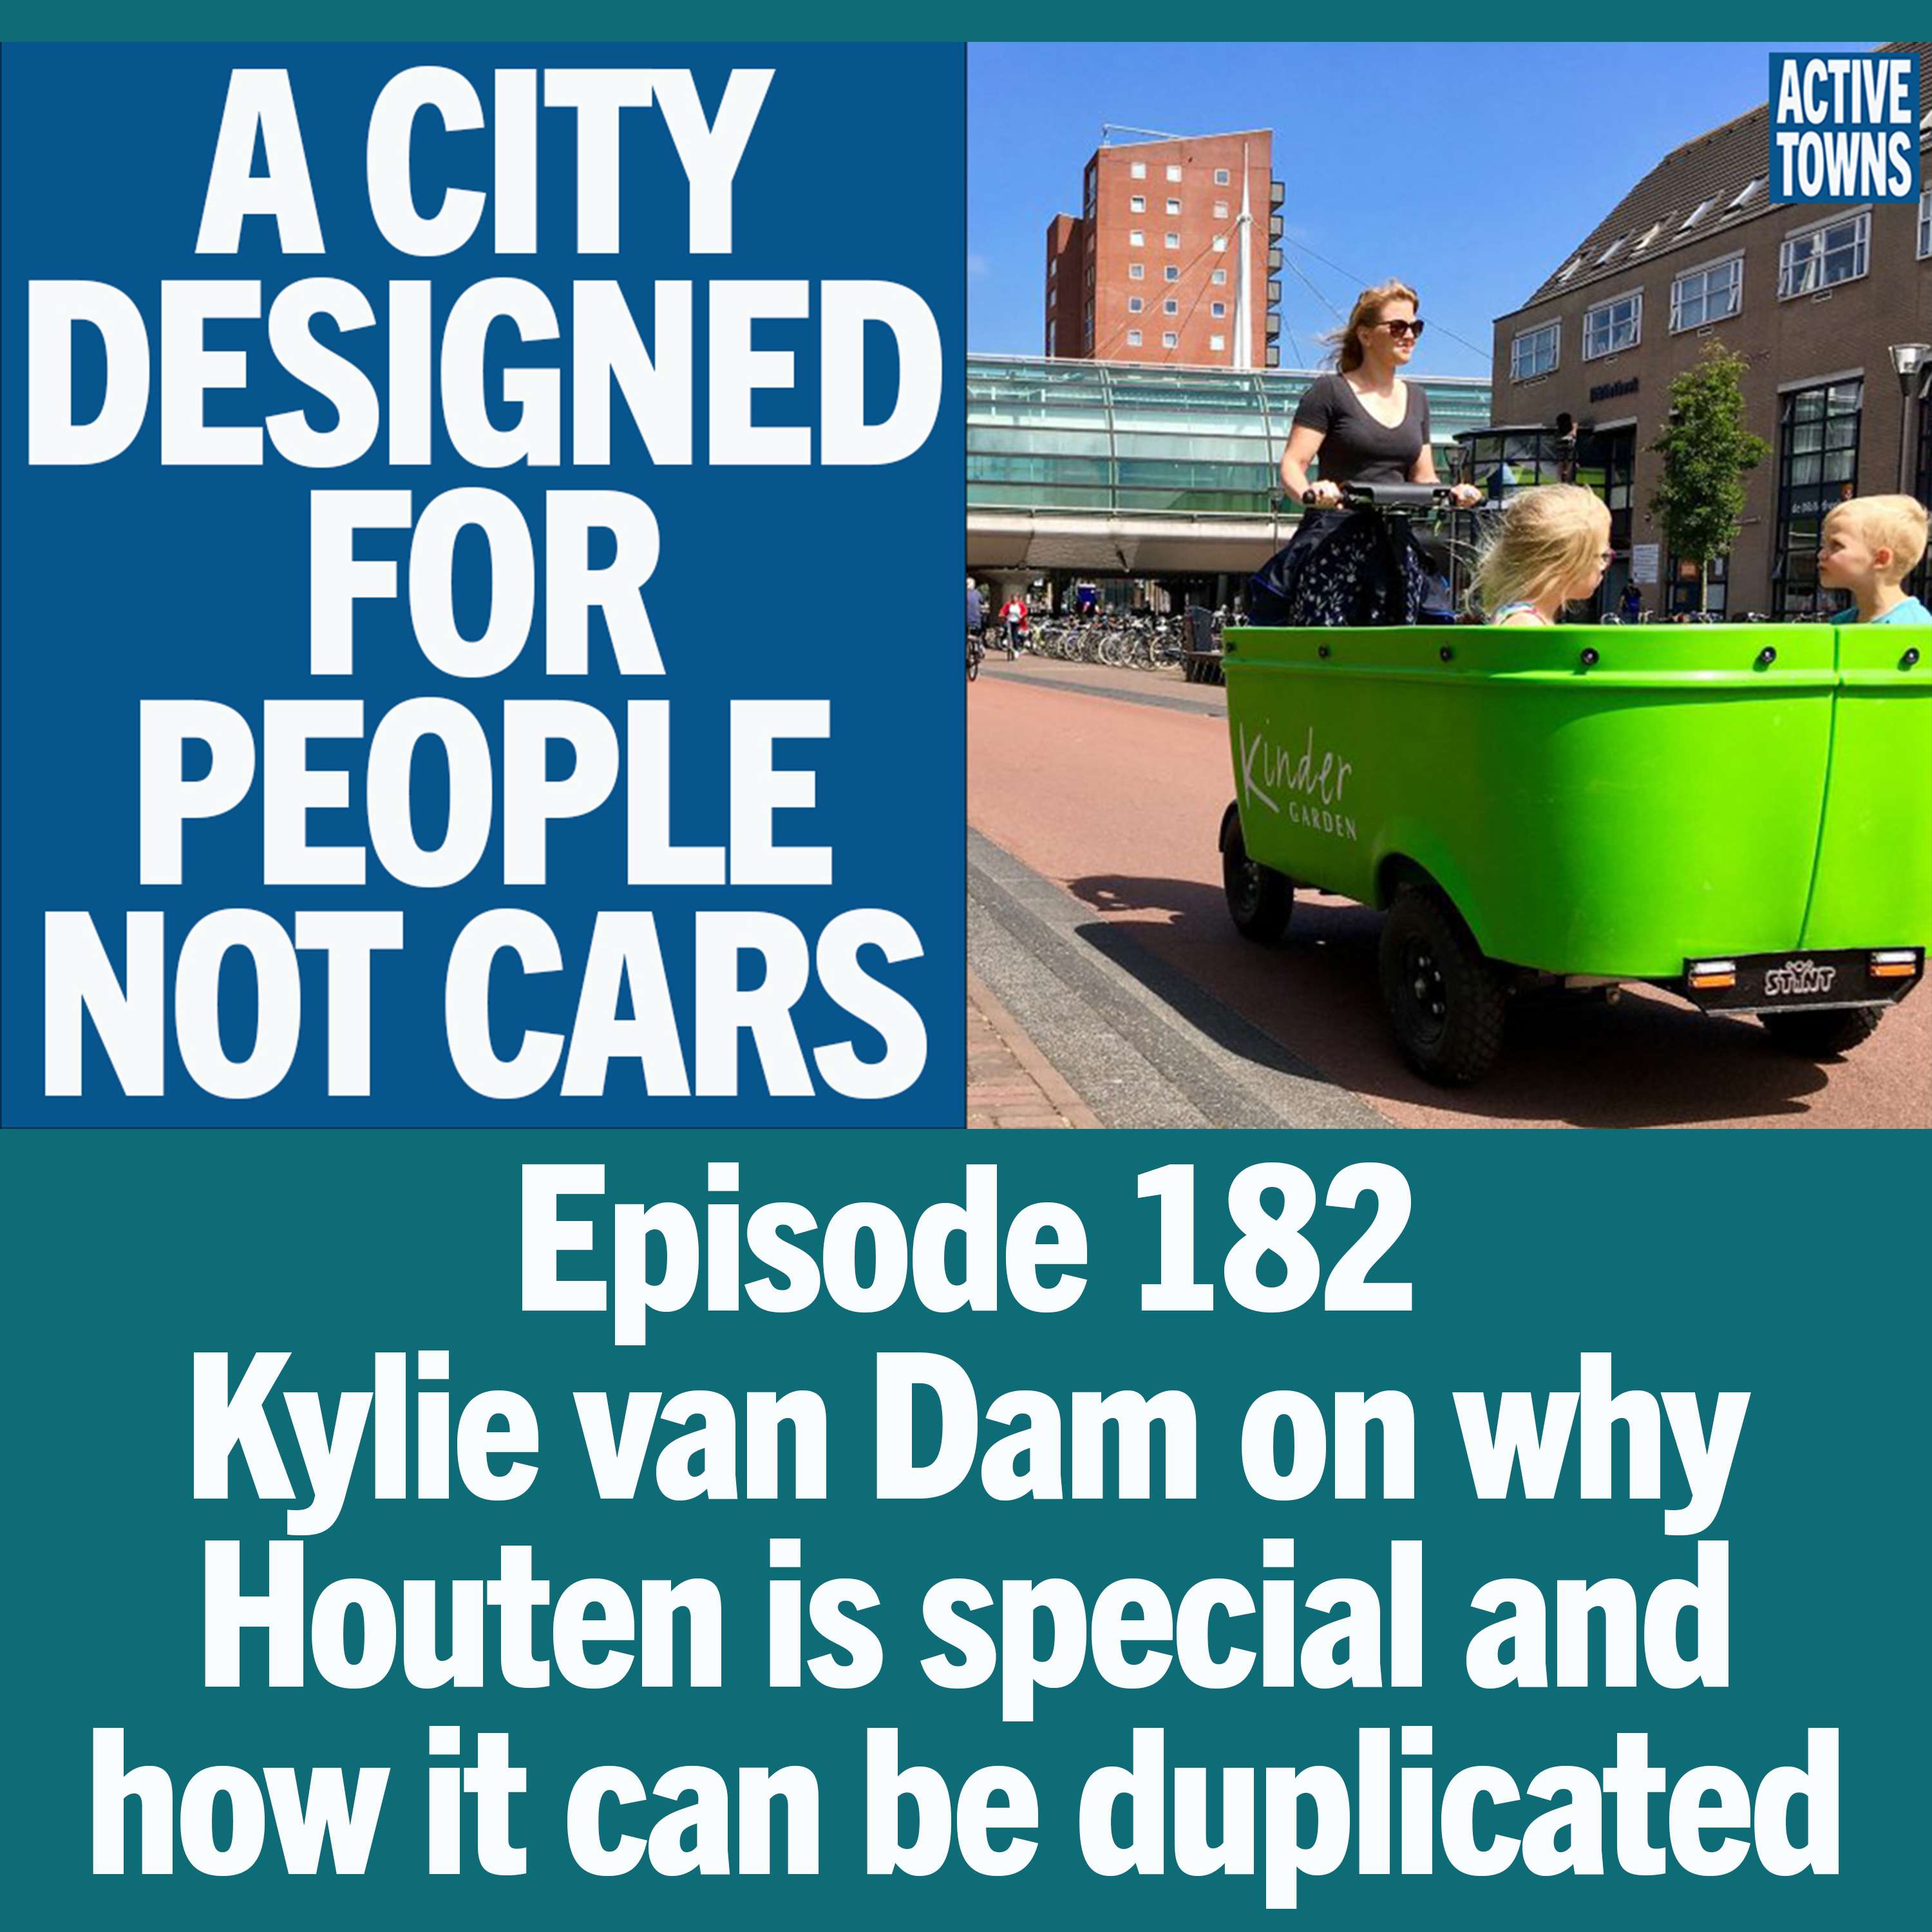 Houten: A City for People w/ Kylie van Dam (video available)